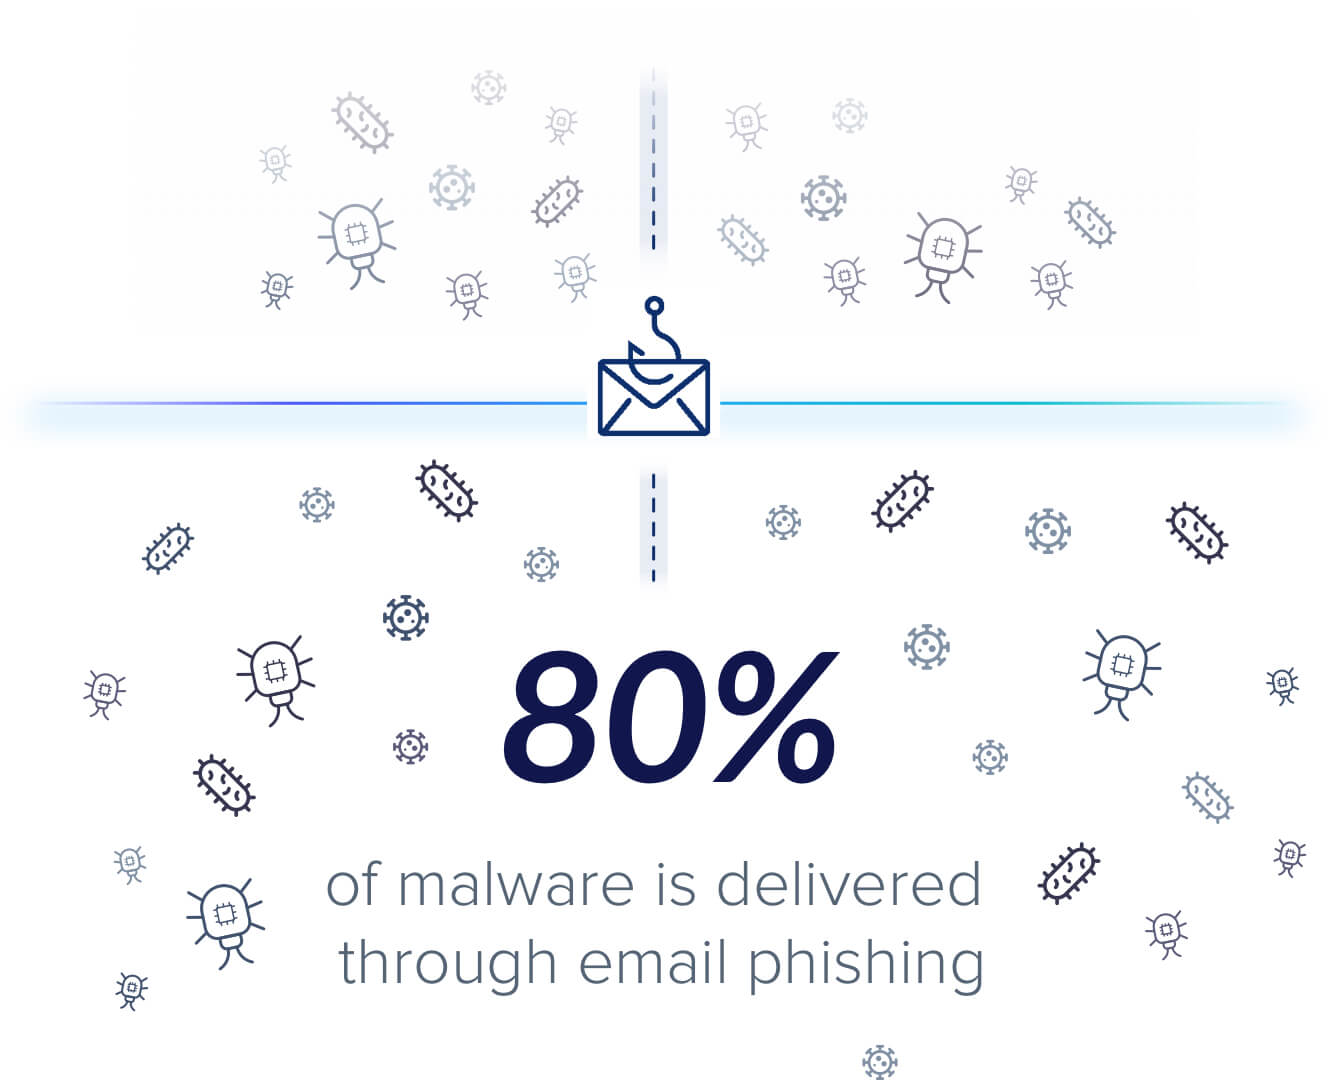 Email is essential but vulnerable